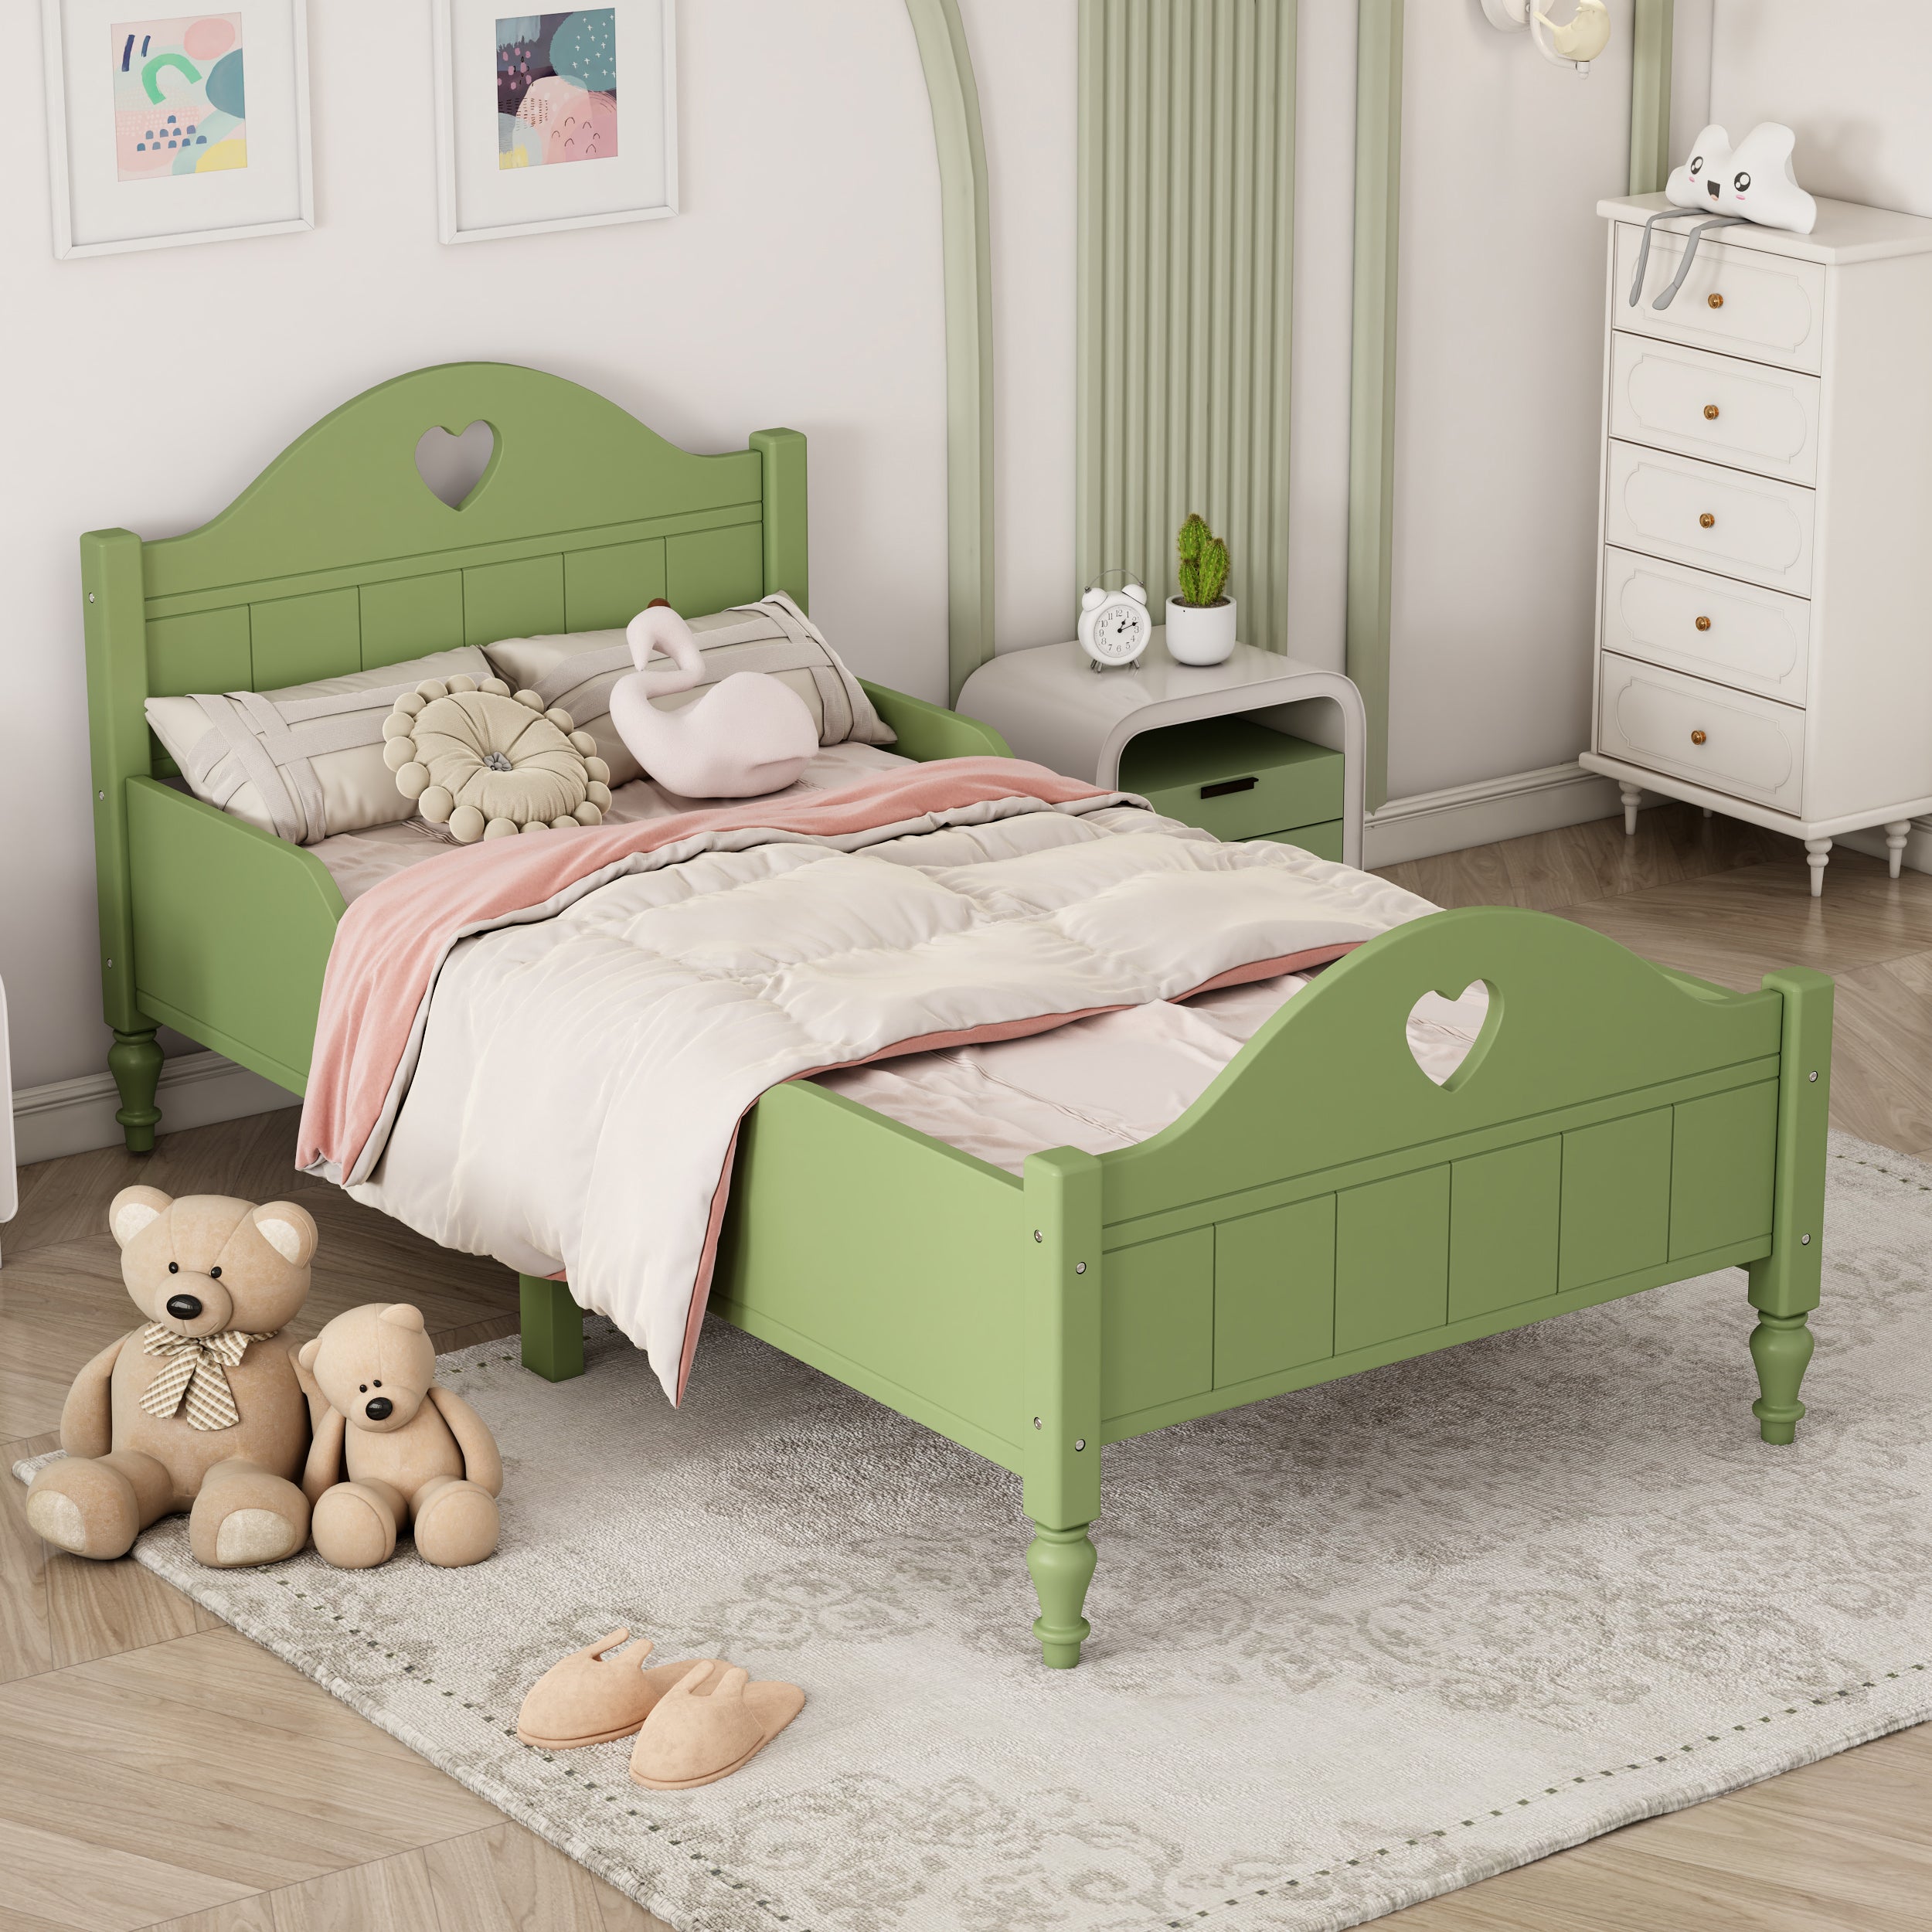 Girl's-Love-Princess-Bed-Macaron-Twin-Size-Toddler-Bed-with-Side-Safety-Rails-,-Olive-Green-Kids-Beds